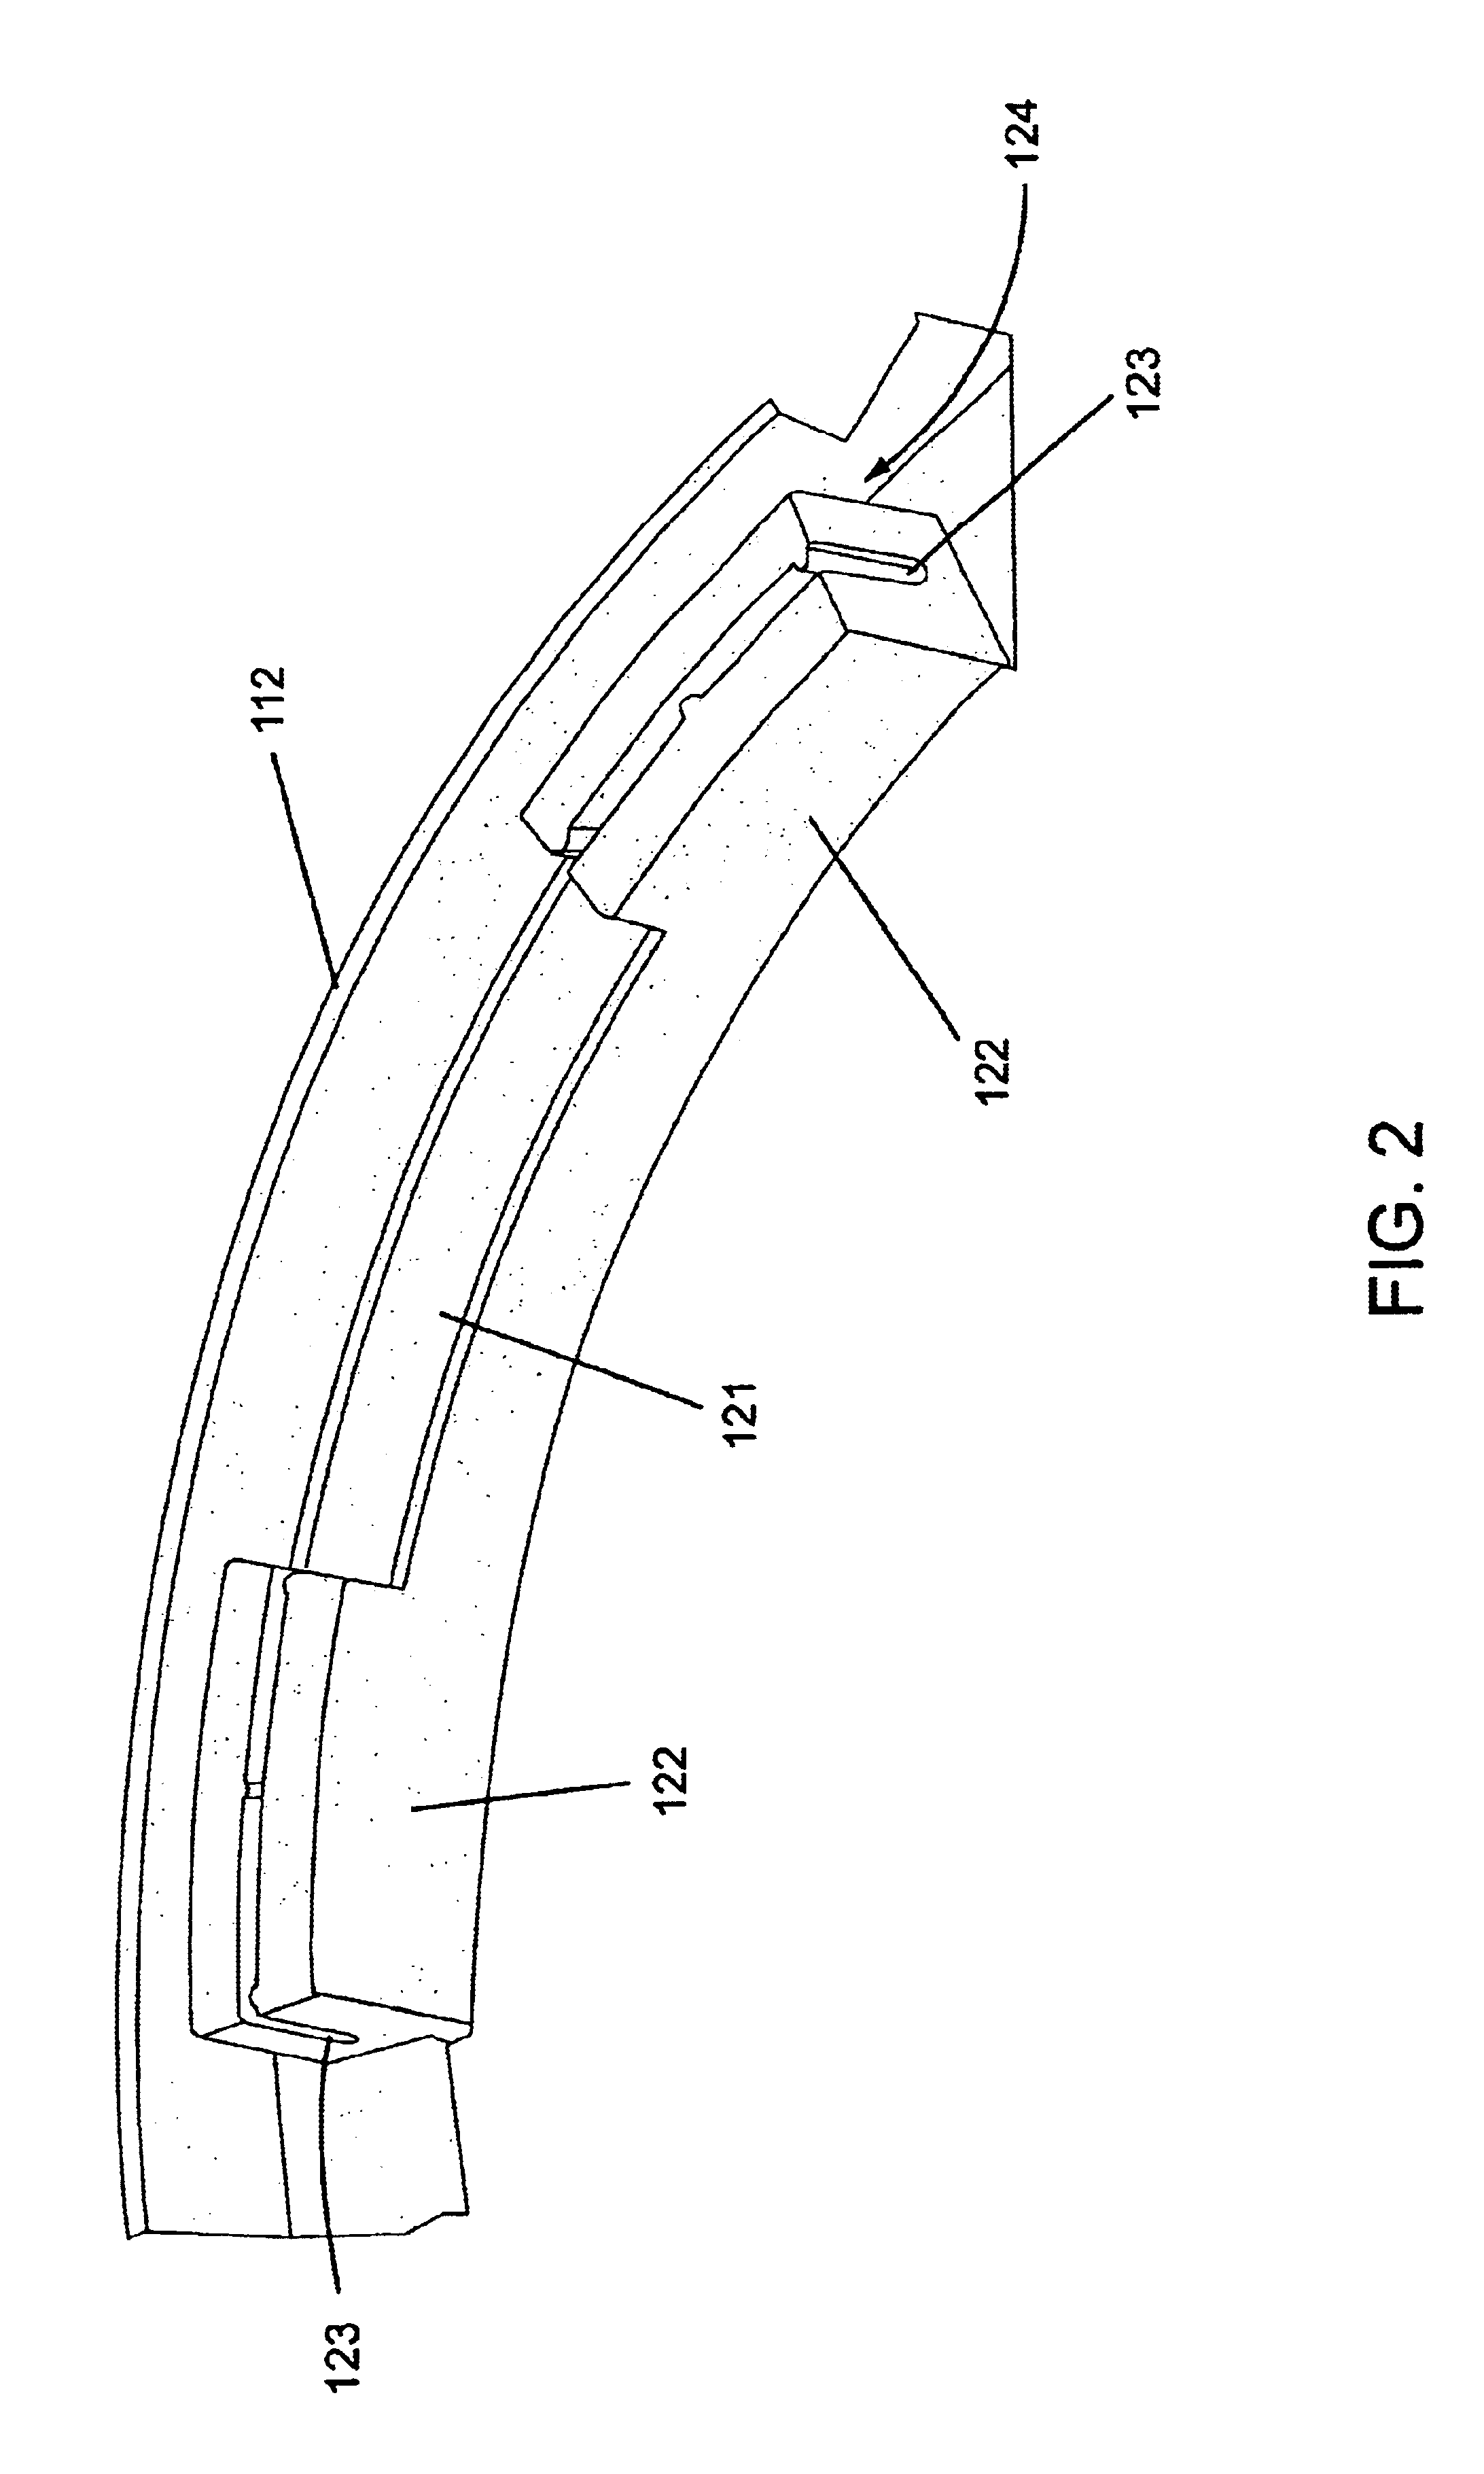 Packaging device for a catheter assembly